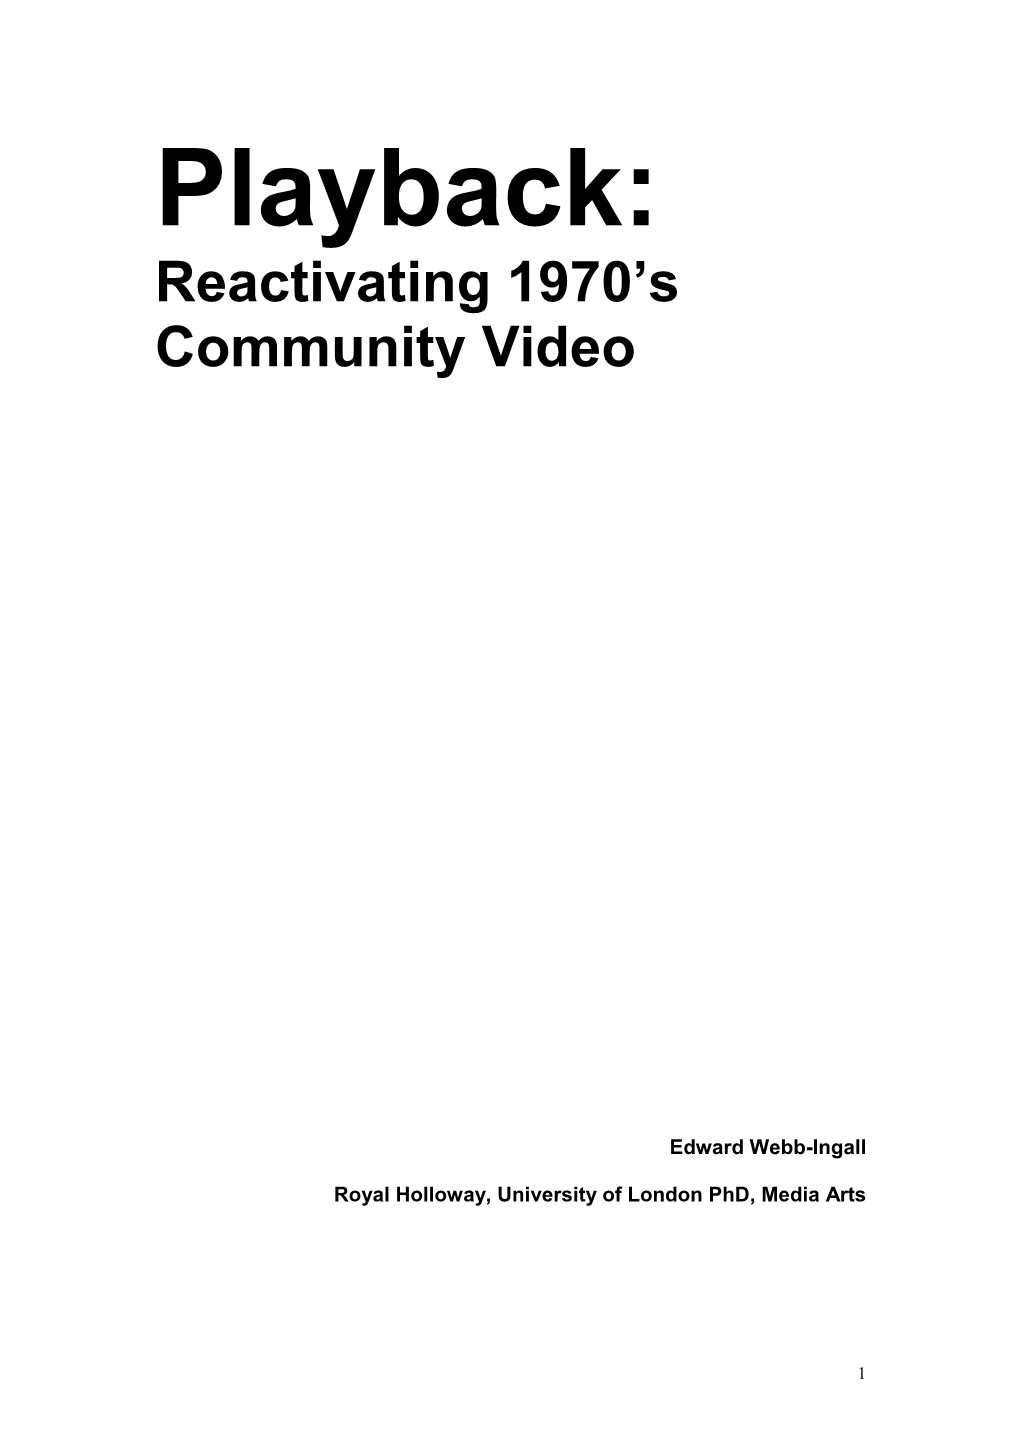 Playback: Reactivating 1970’S Community Video